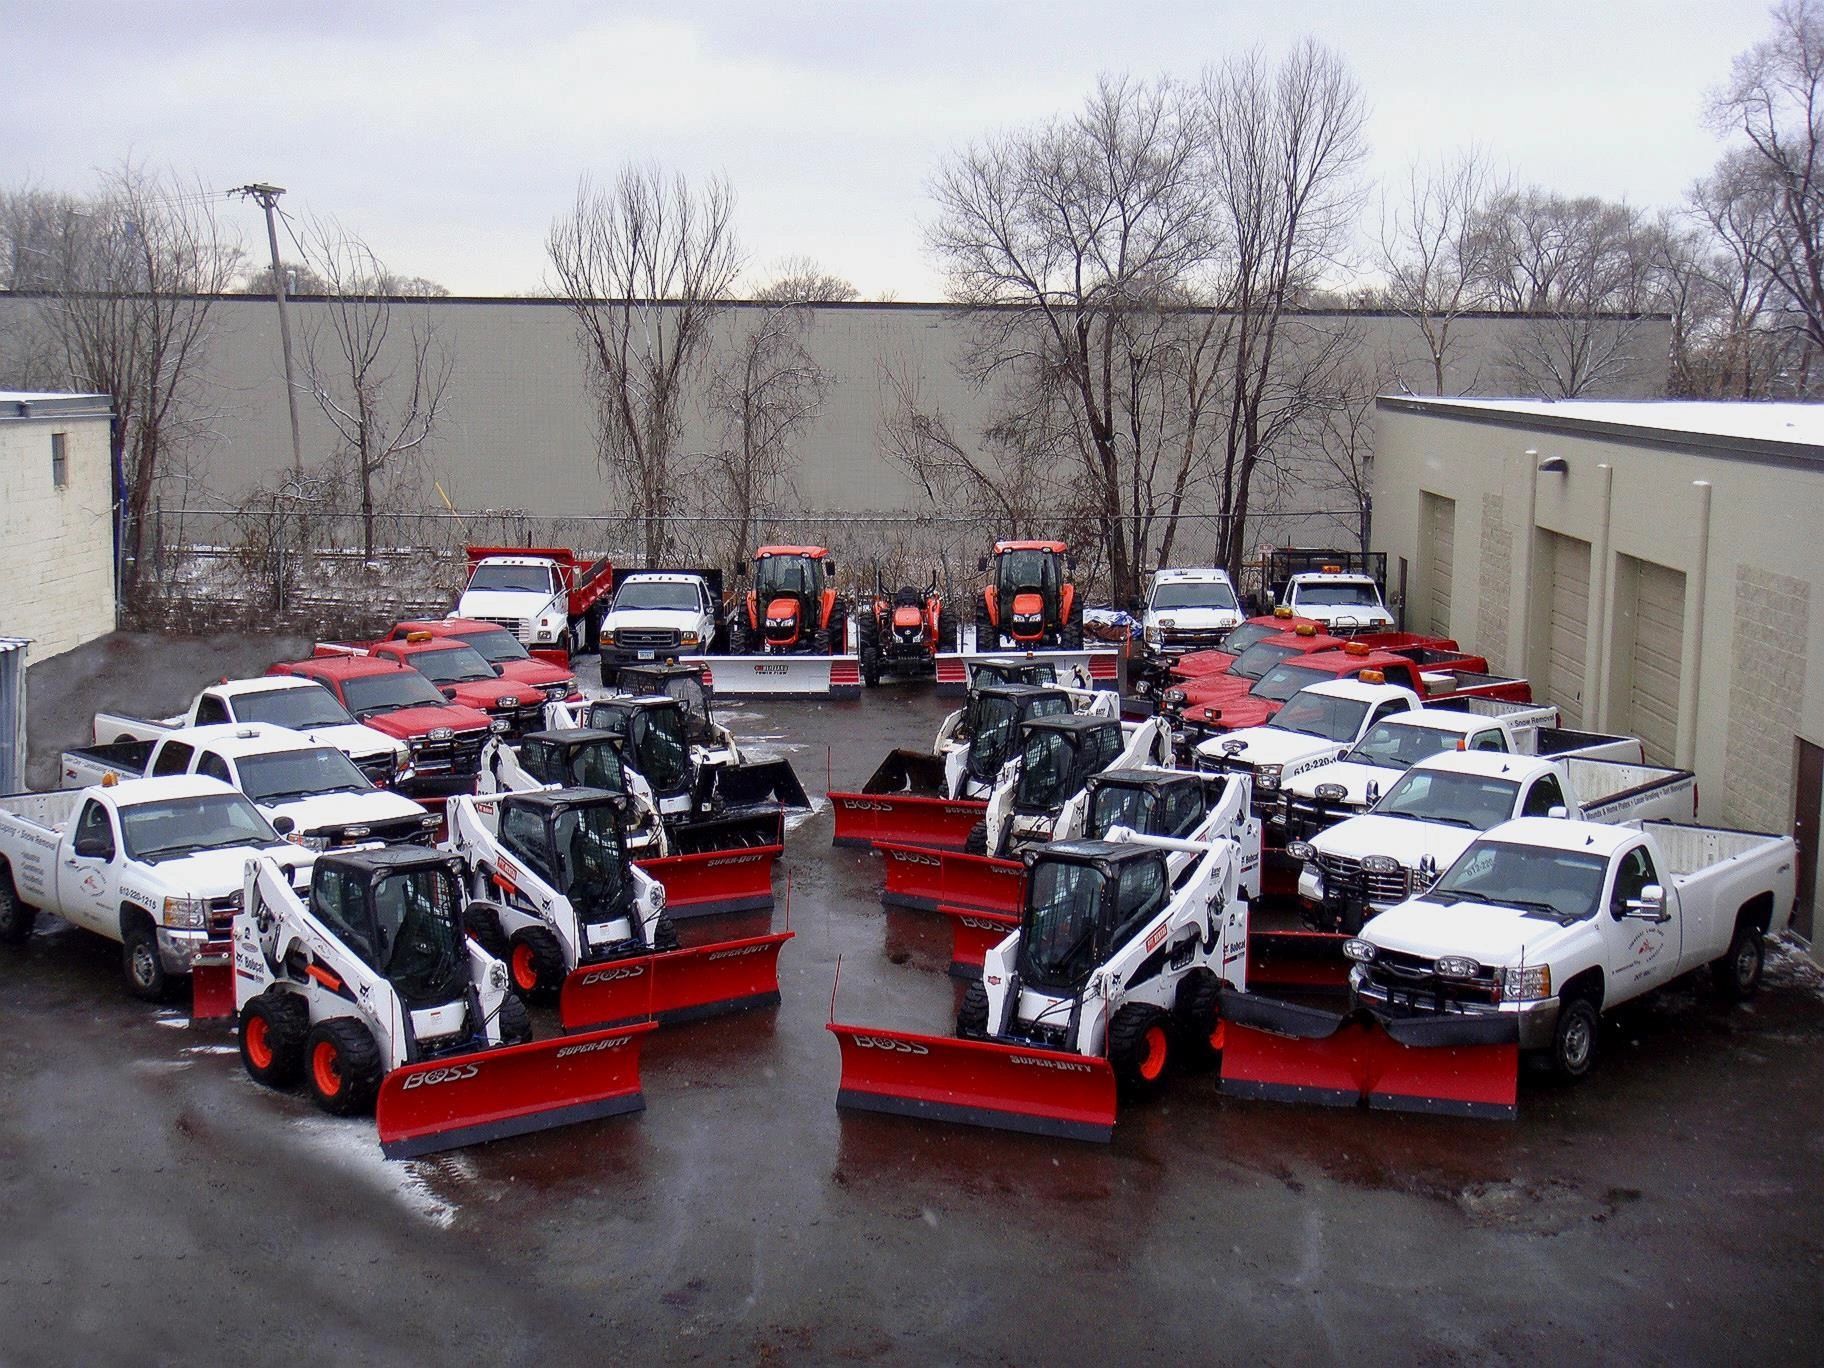 Trucks, tractors, and skid loaders equipped with plows and clear company branding